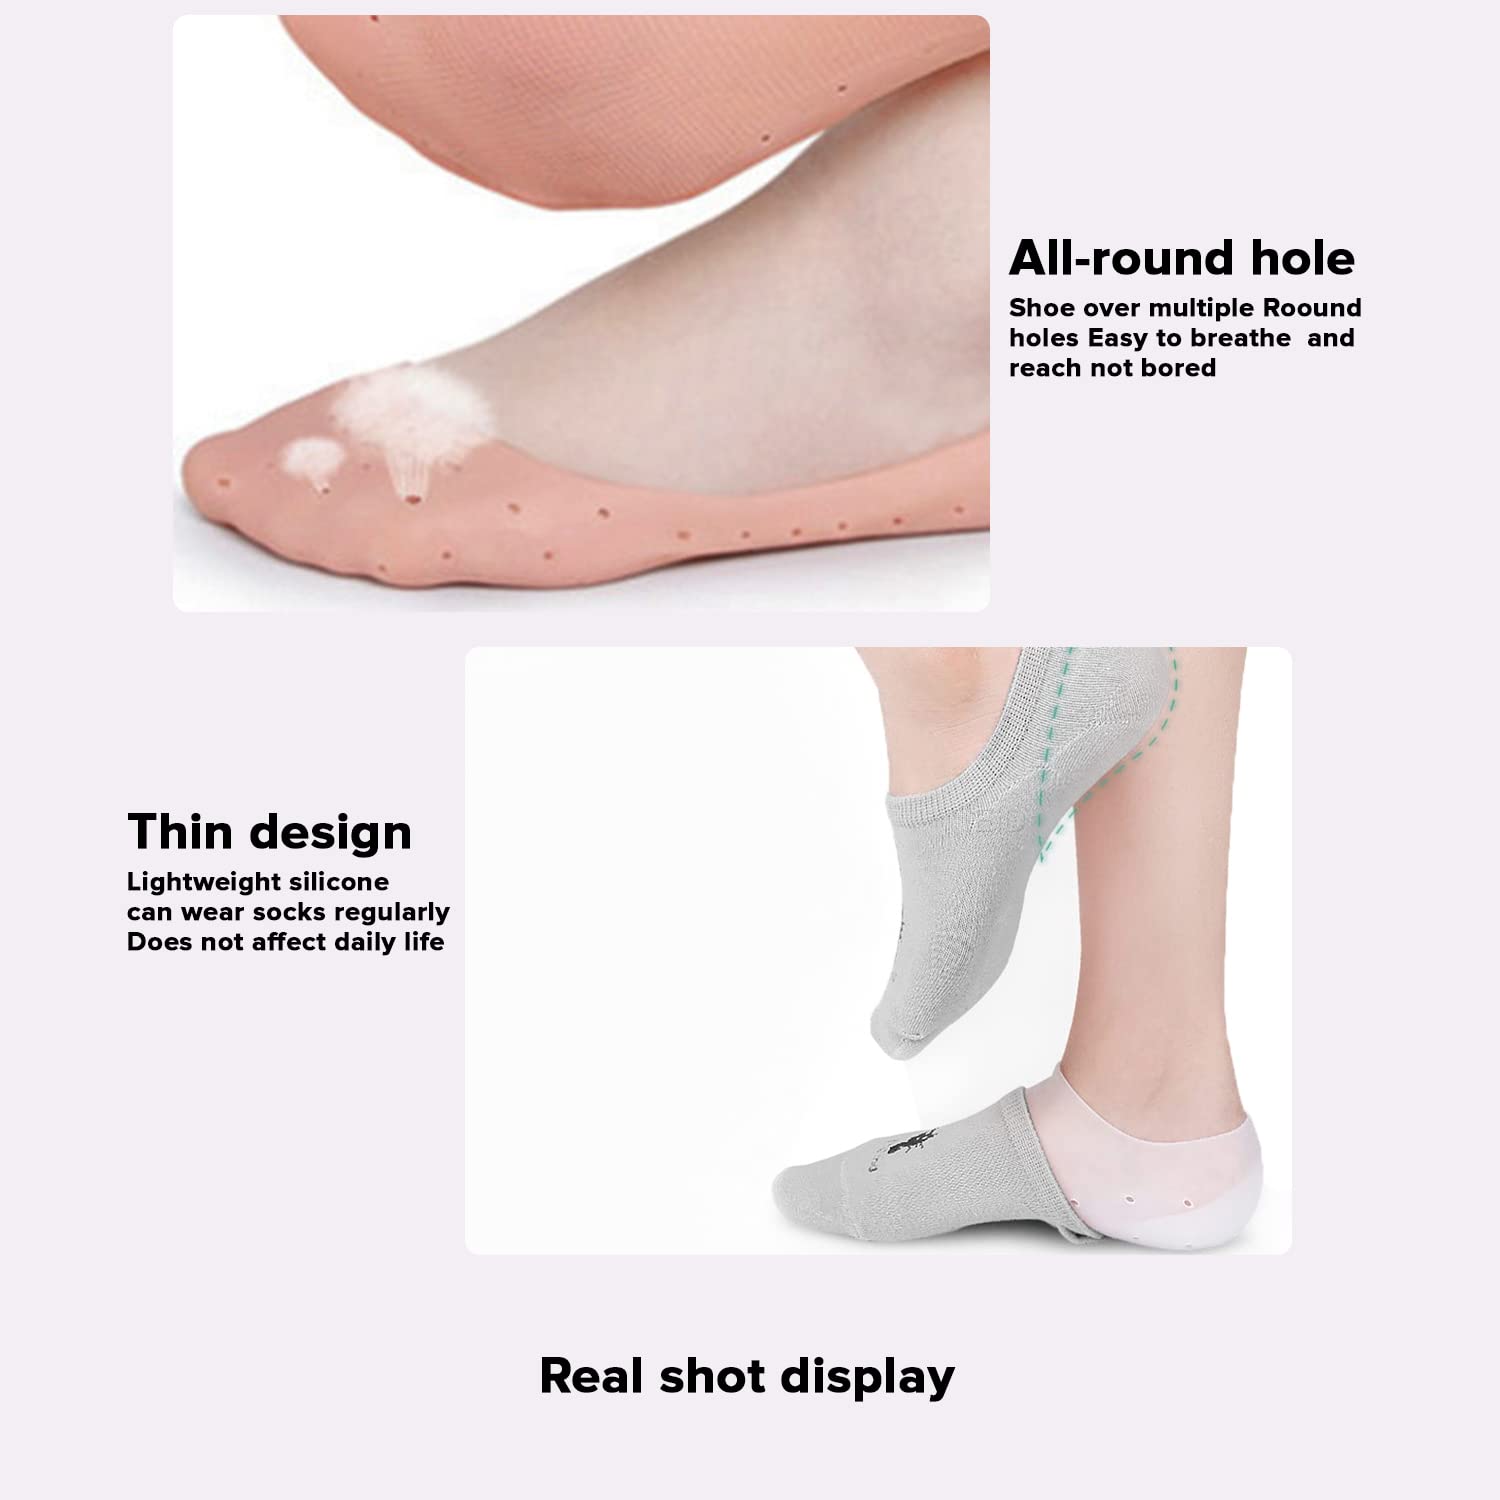 Dr Foot Silicone Moisturizing Heel Socks | For Dry, Cracked Heels – Drfootin